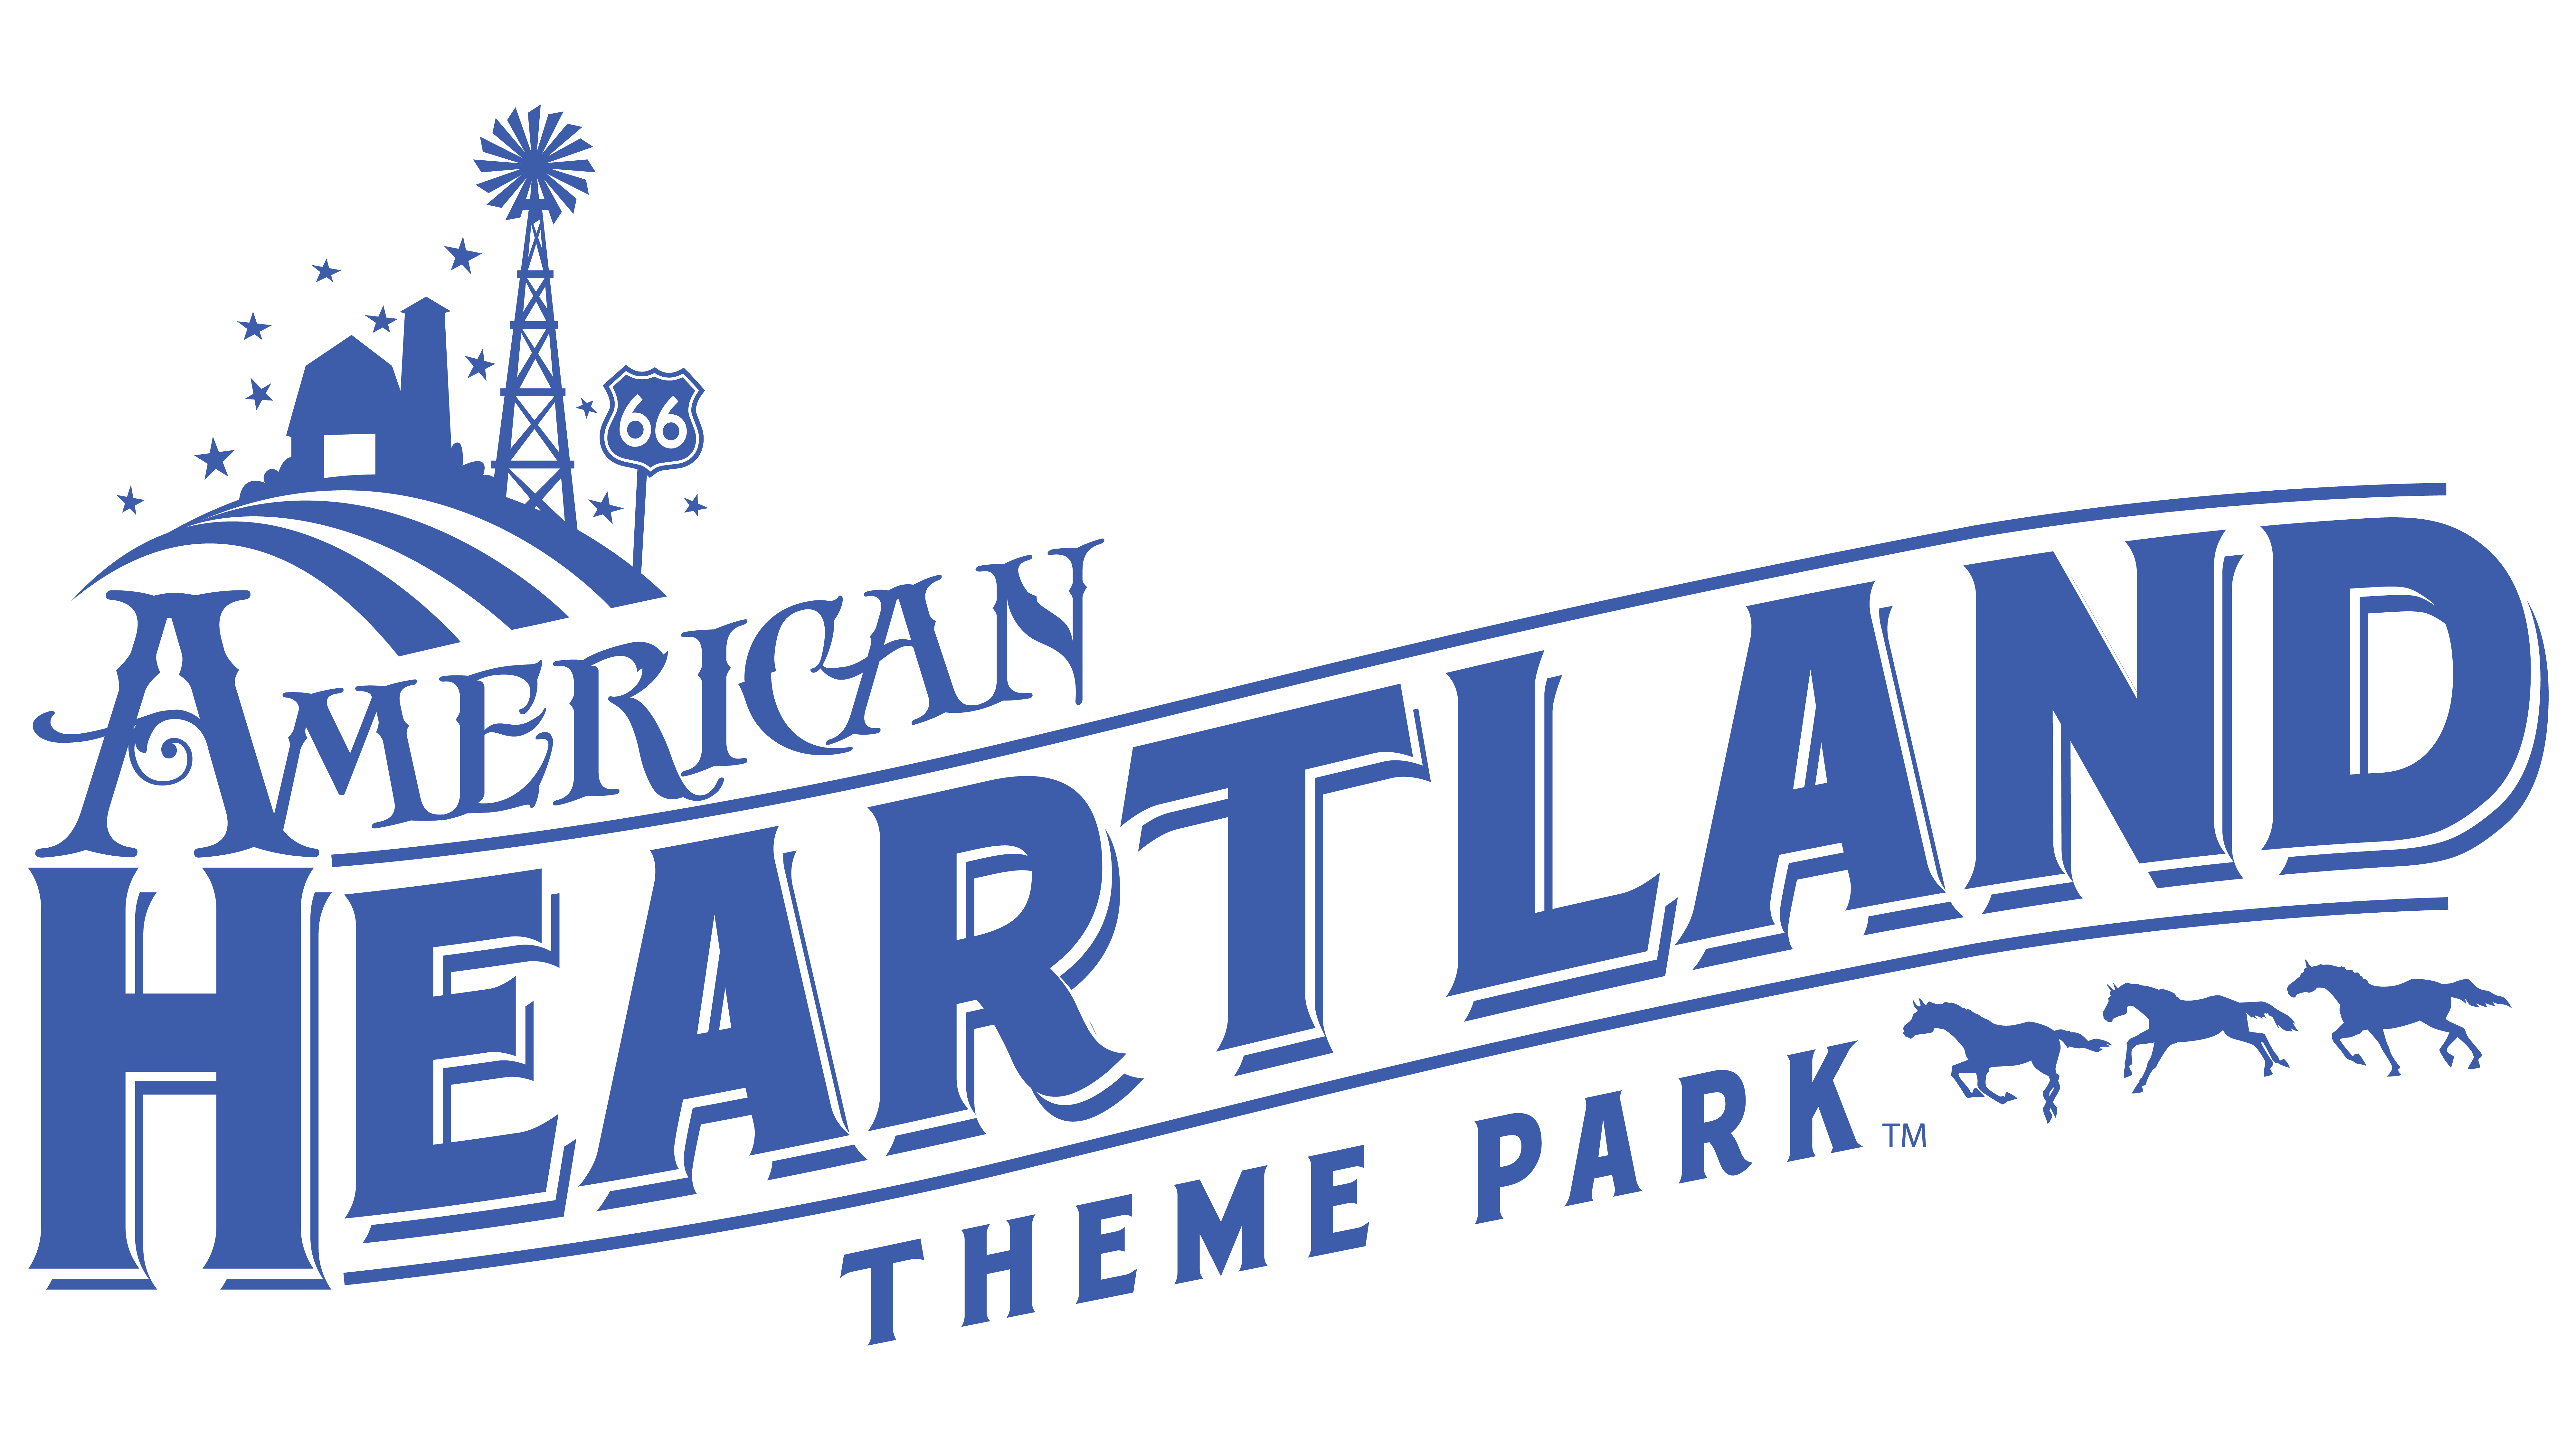 What we know about the American Heartland Theme Park